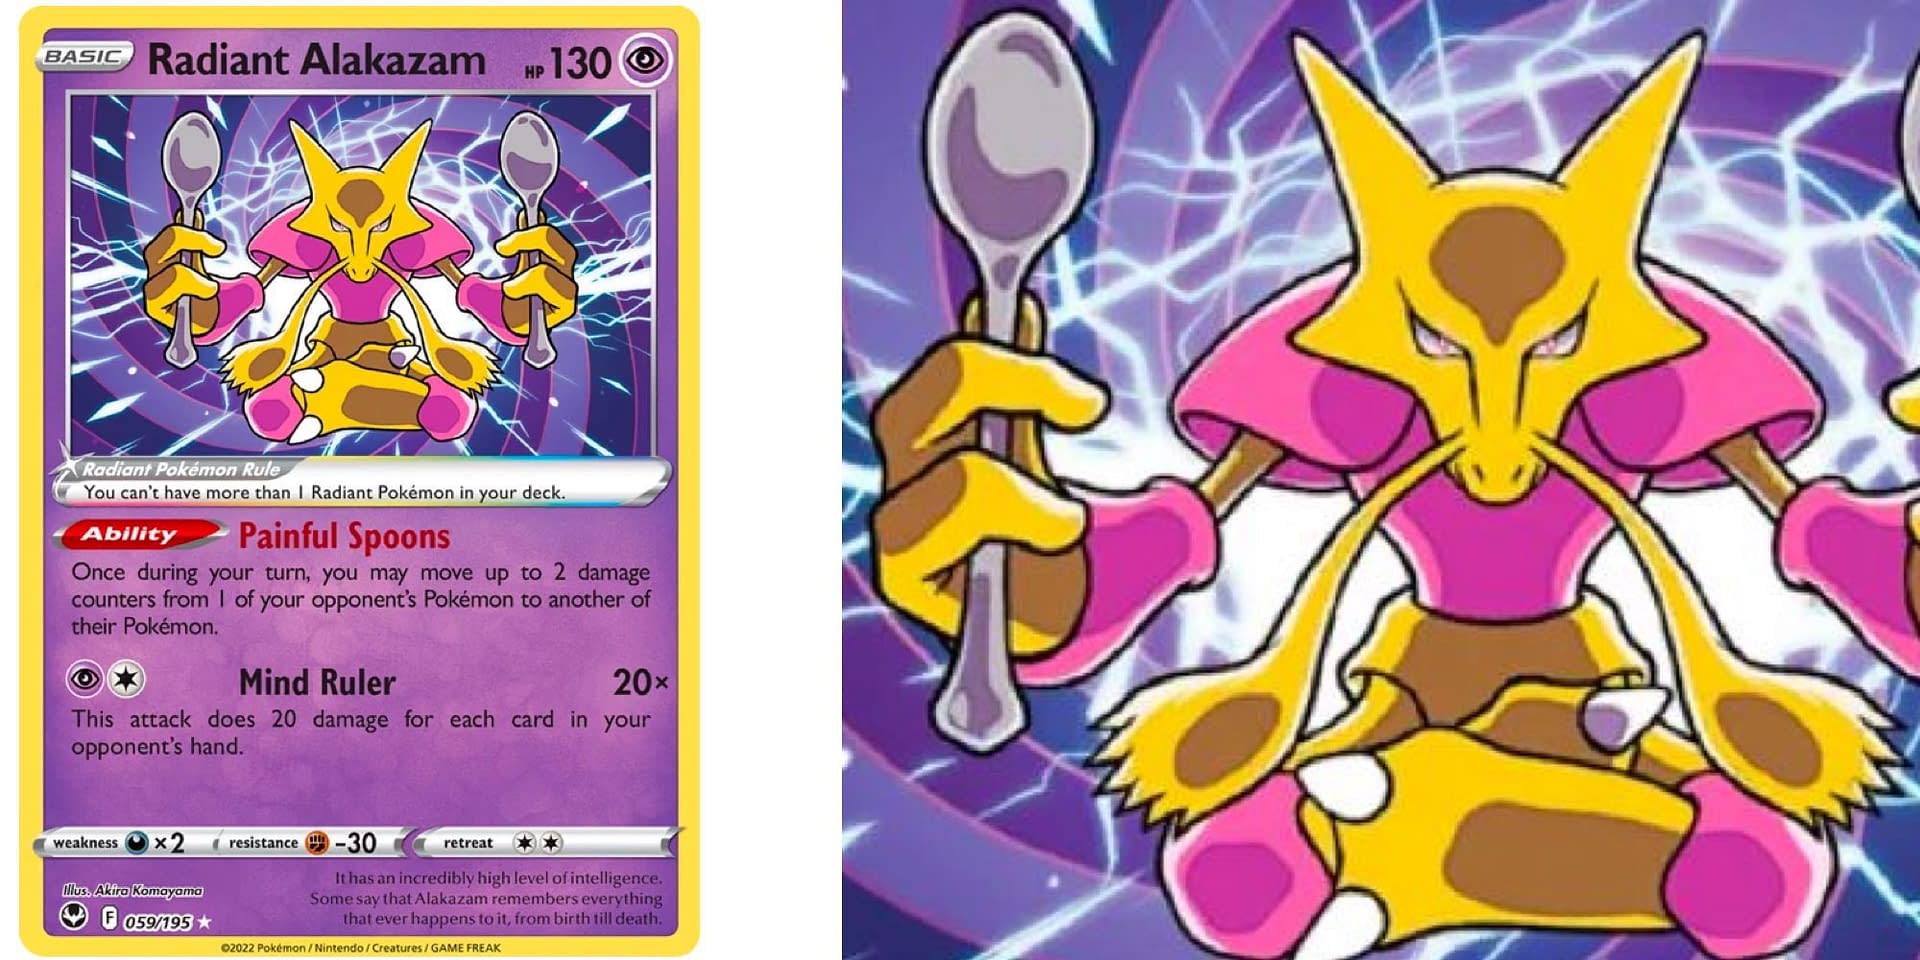 Pulled a Radiant Alakazam from a Silver Tempest pack I got early